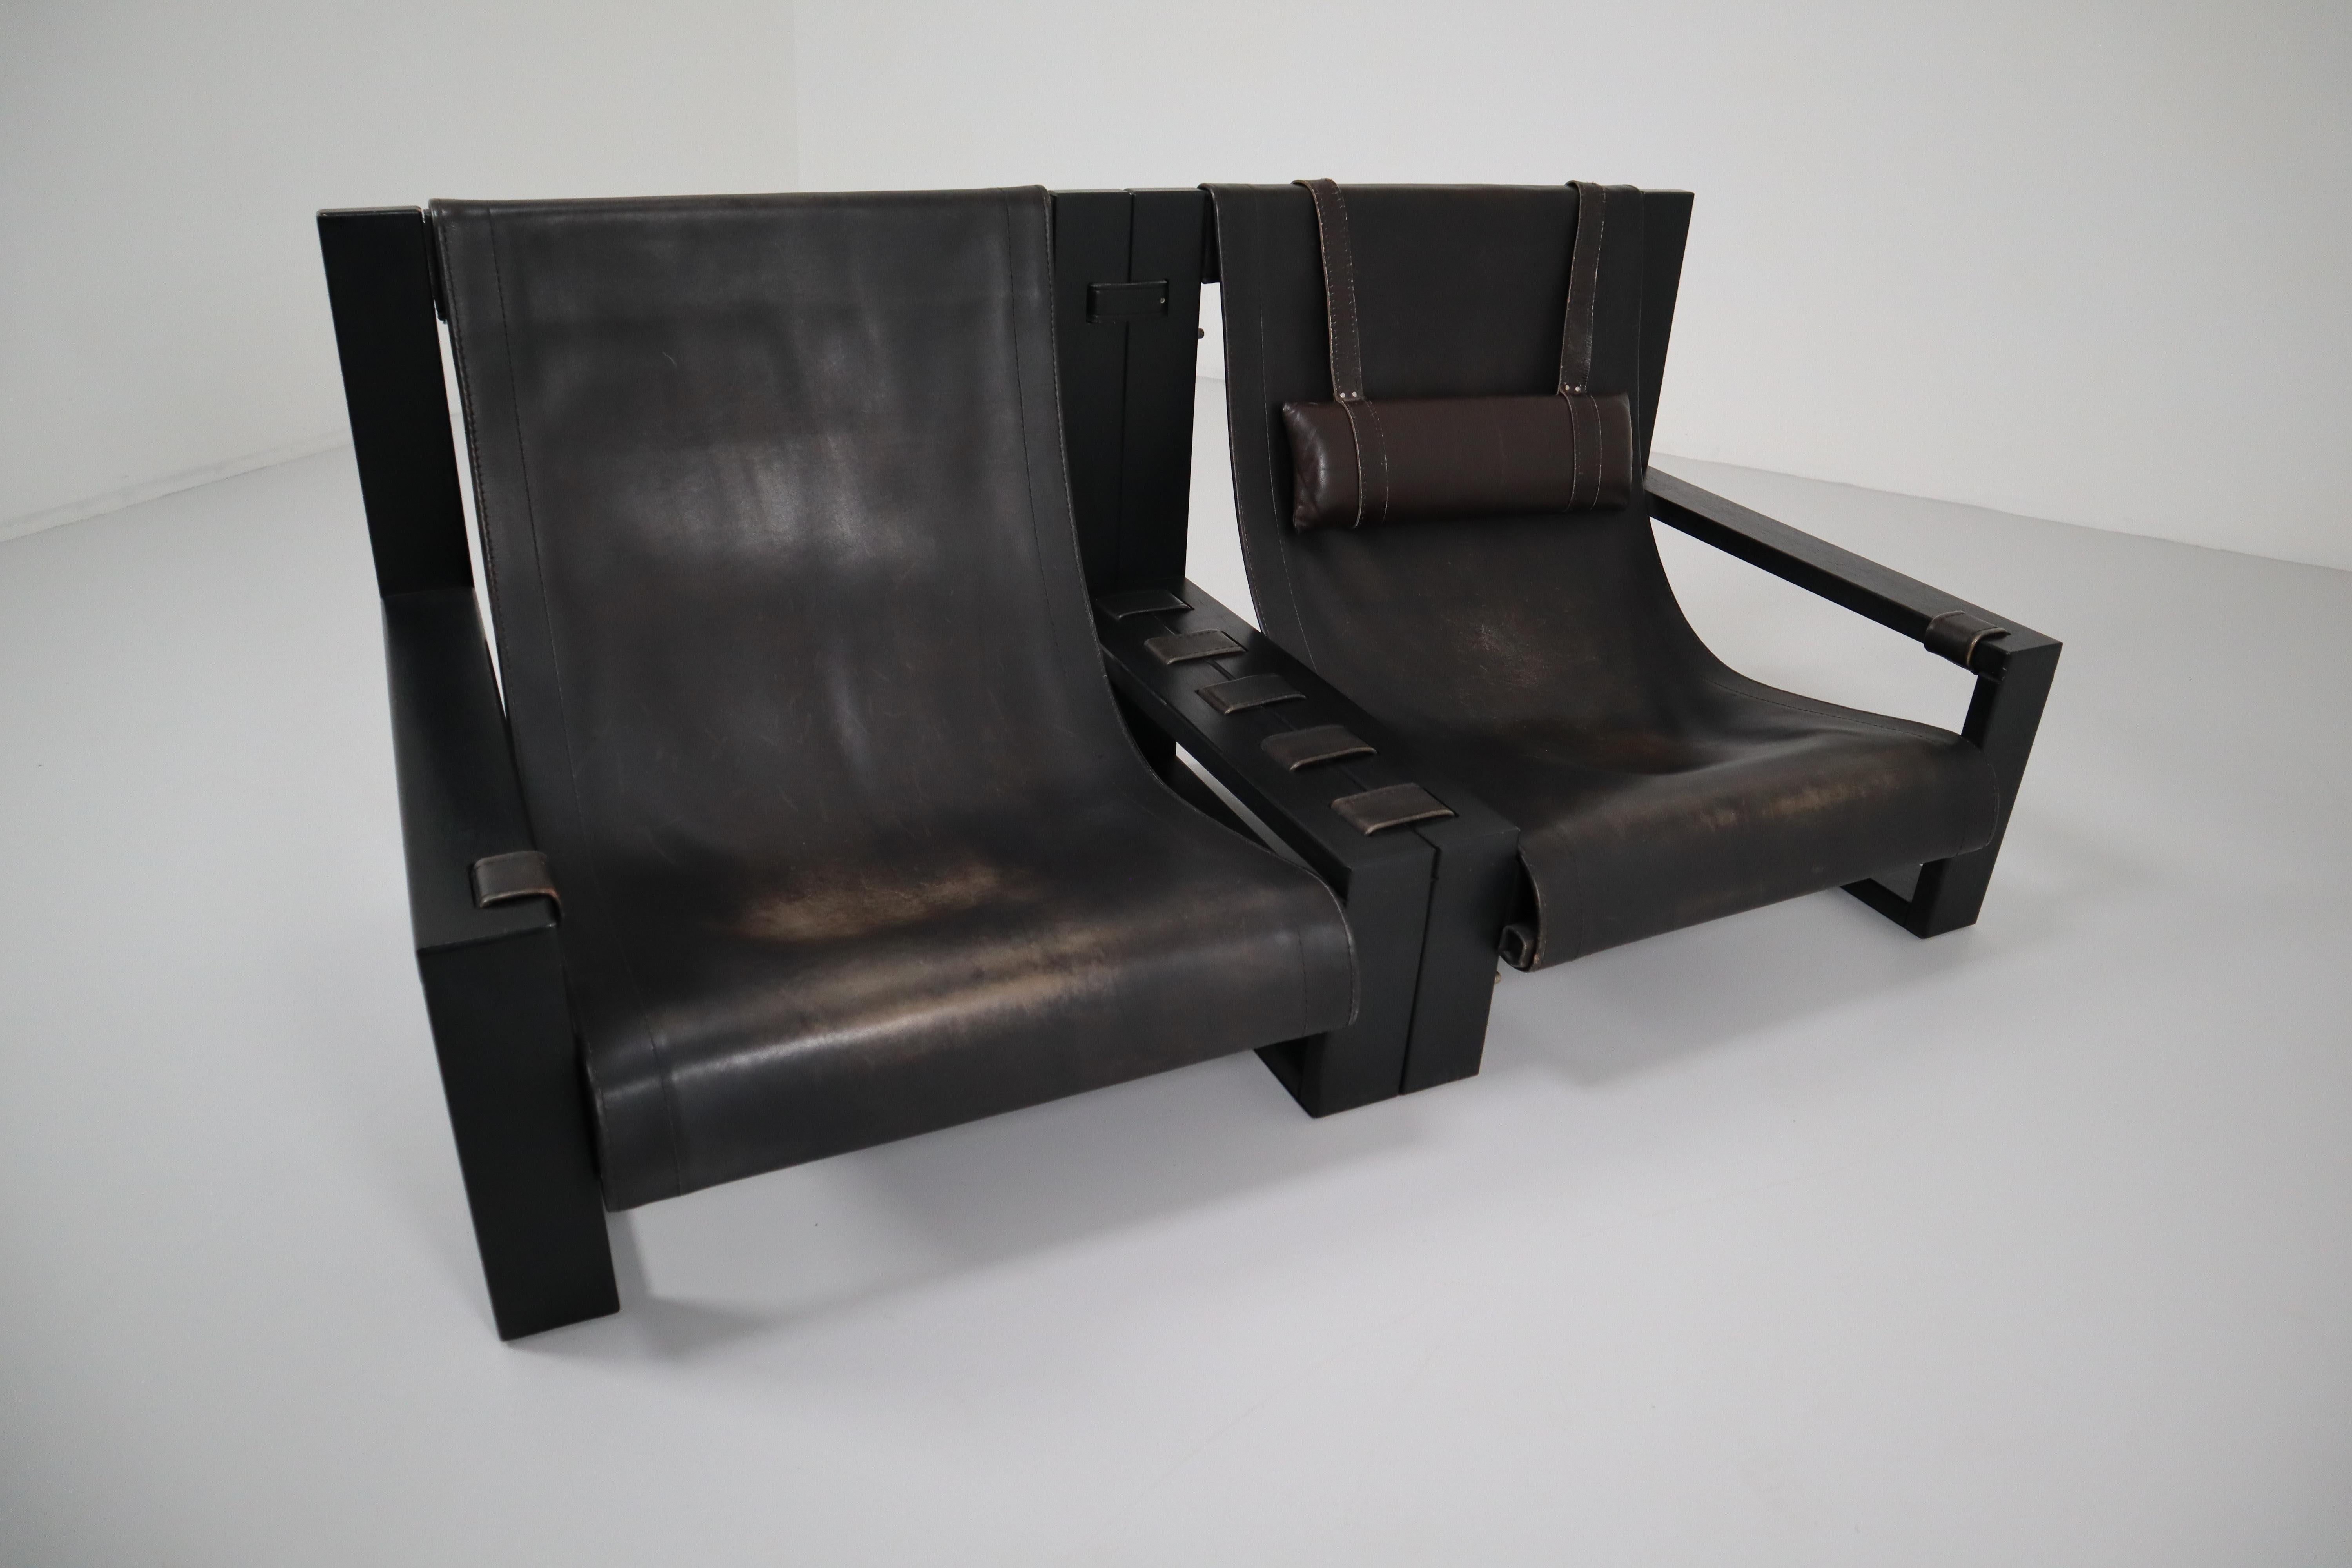 Exceptional and architectural lounge 2-seat sofa -chair designed by Sonja Wasseur, the Netherlands, circa 1970.
She produced her inventive work at her own atelier in Amsterdam for only a short period of time. Her occasional Brutalist lounge chairs